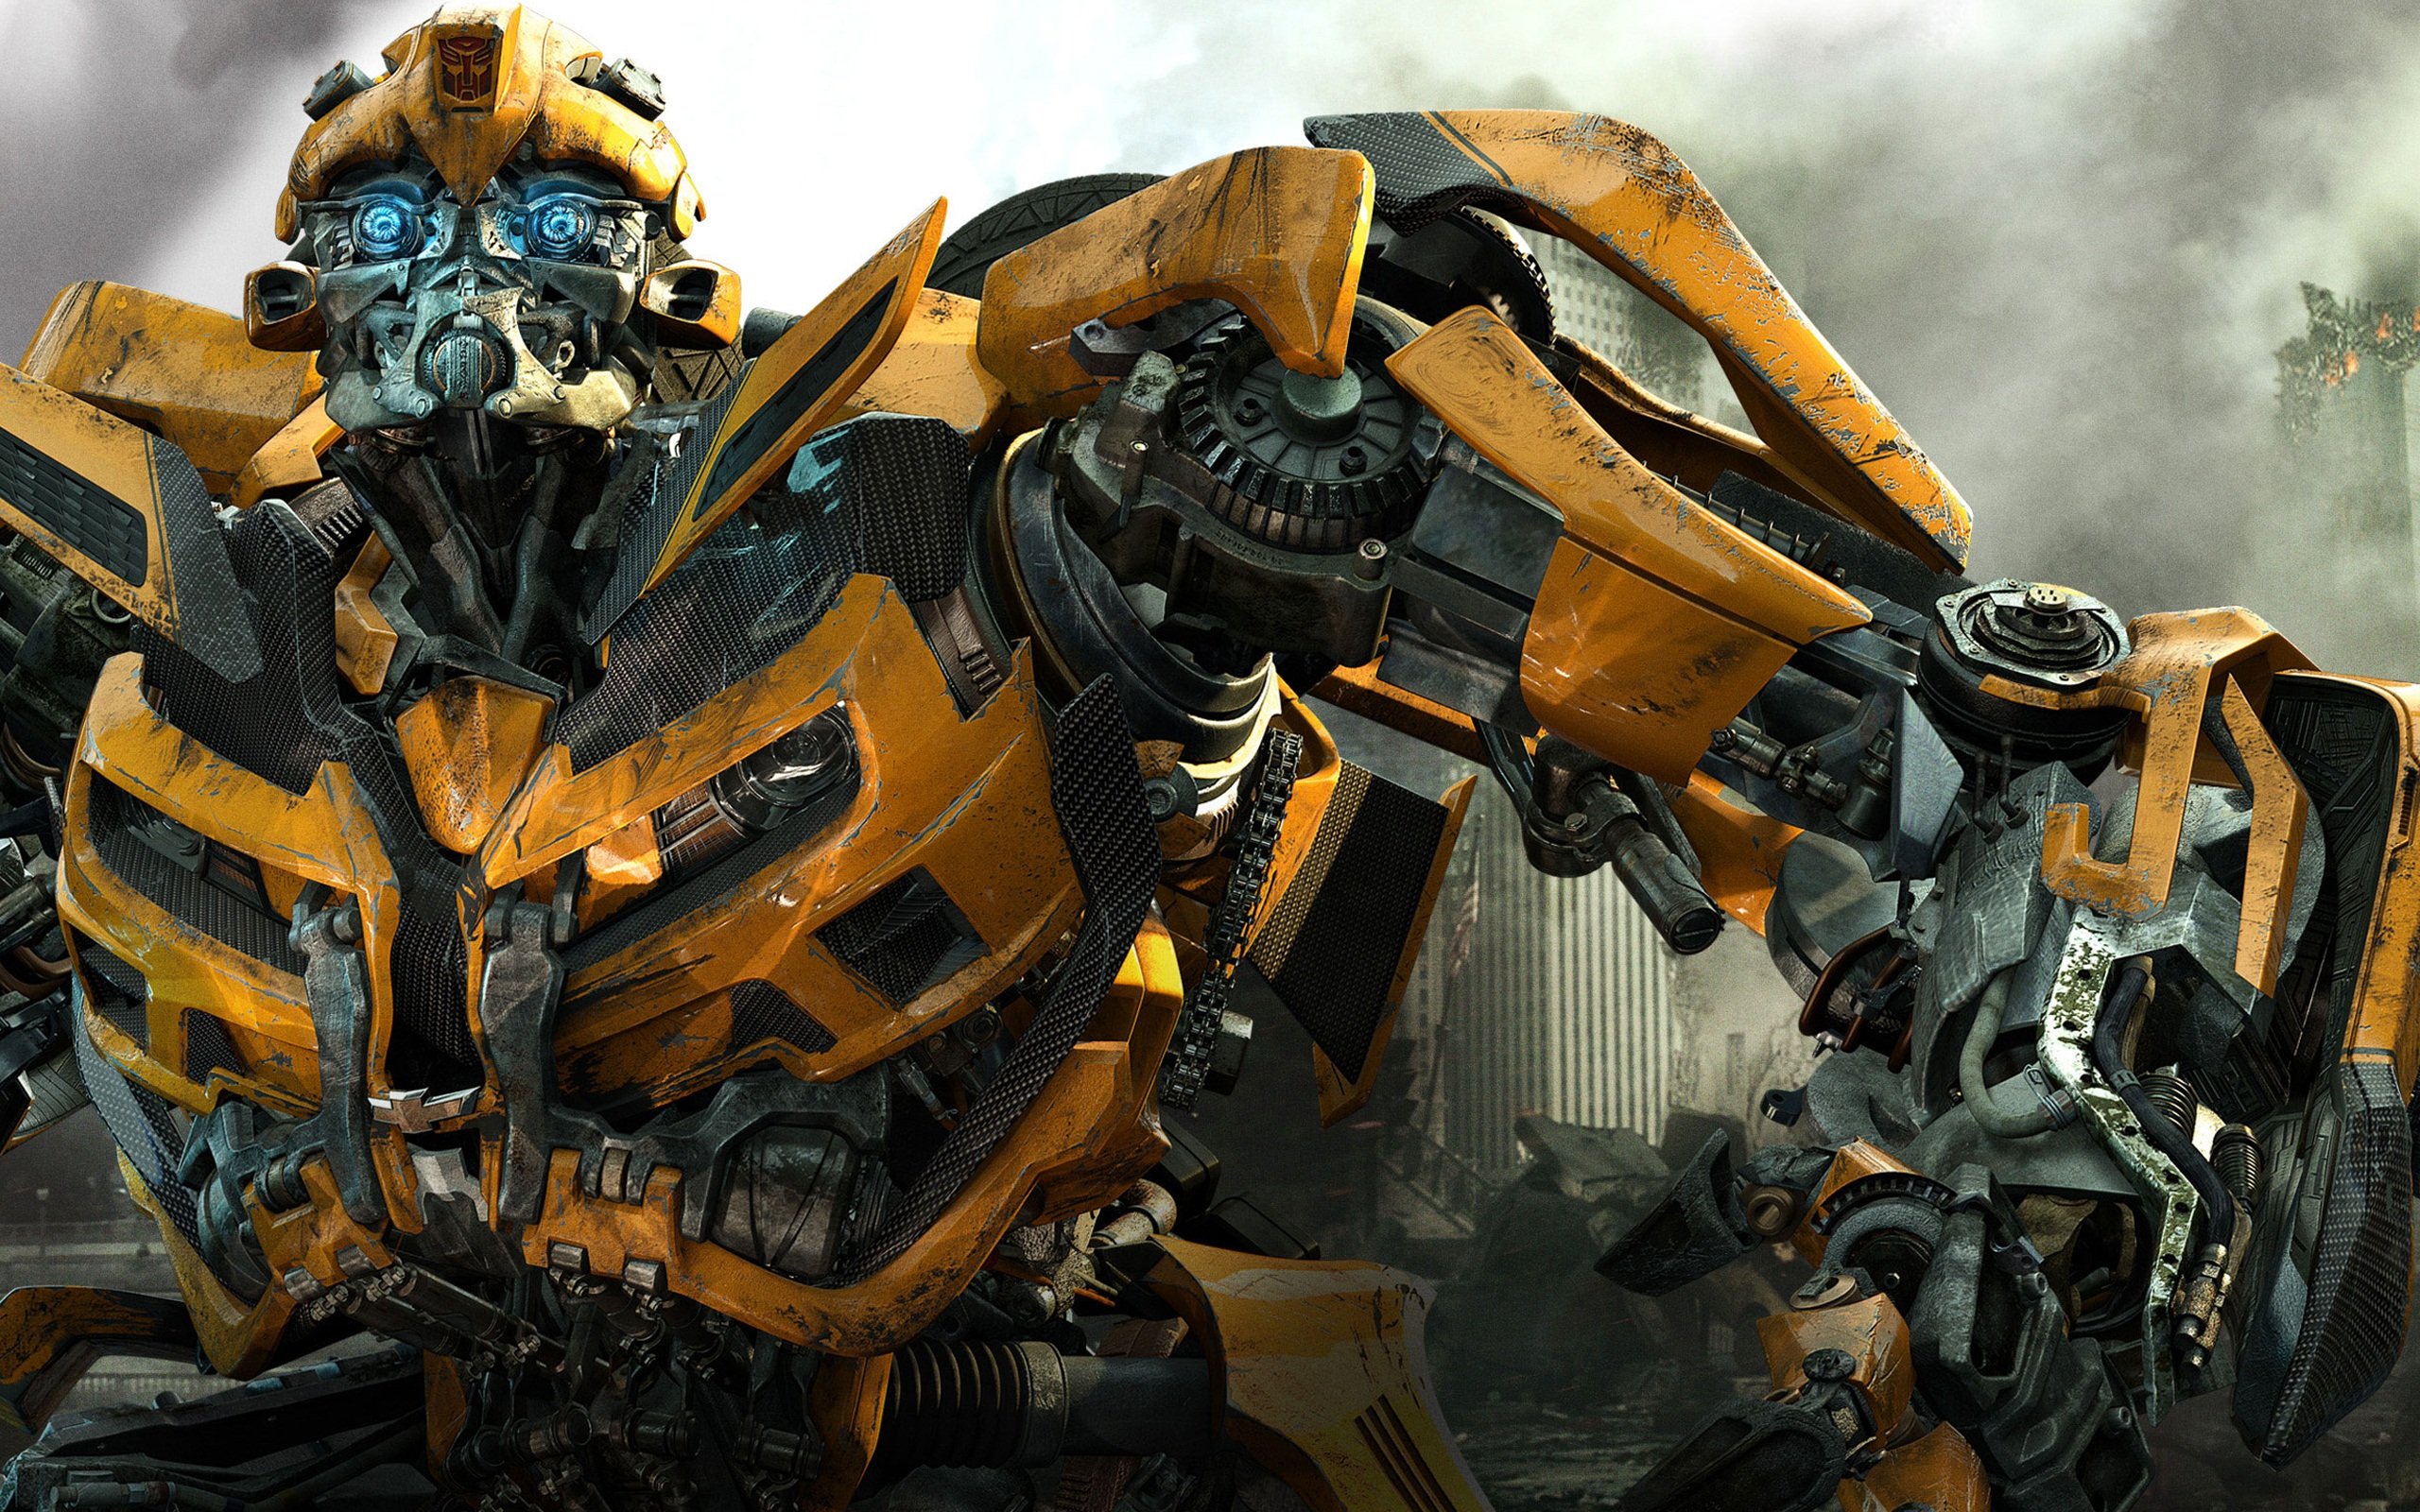 First Look At New Bumblebee In 'Transformers: The Last Knight